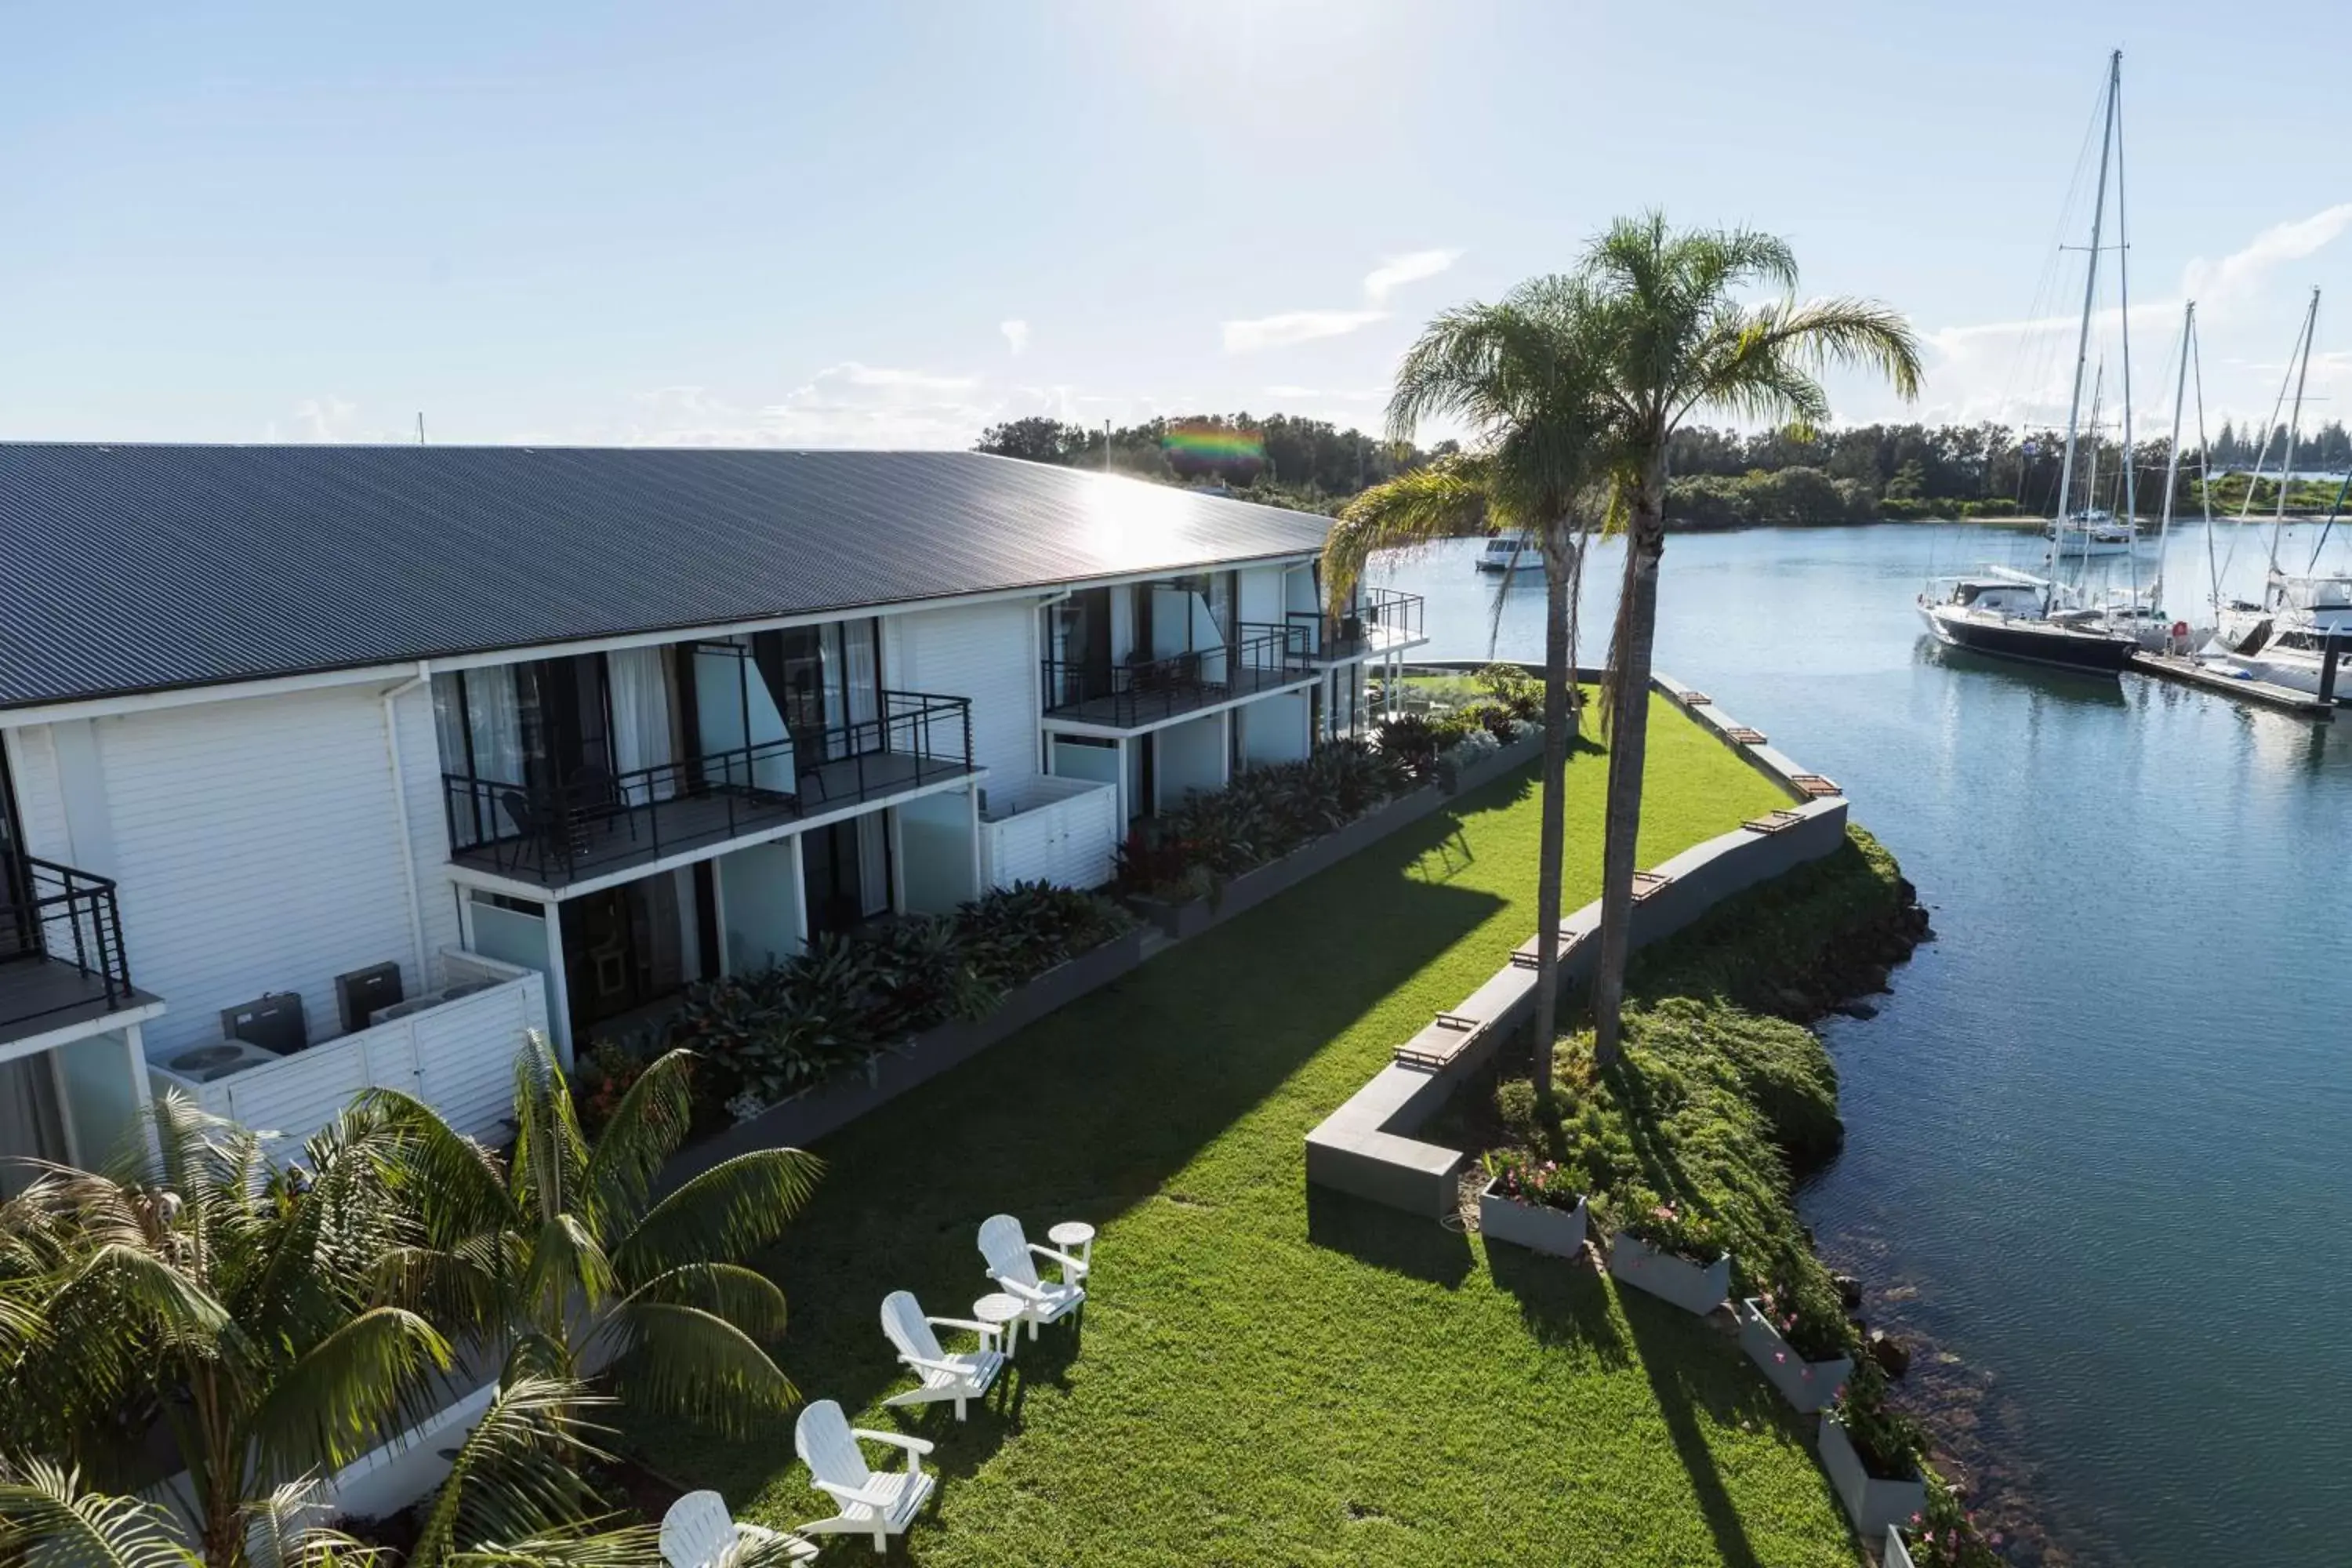 Property building in Sails Port Macquarie by Rydges